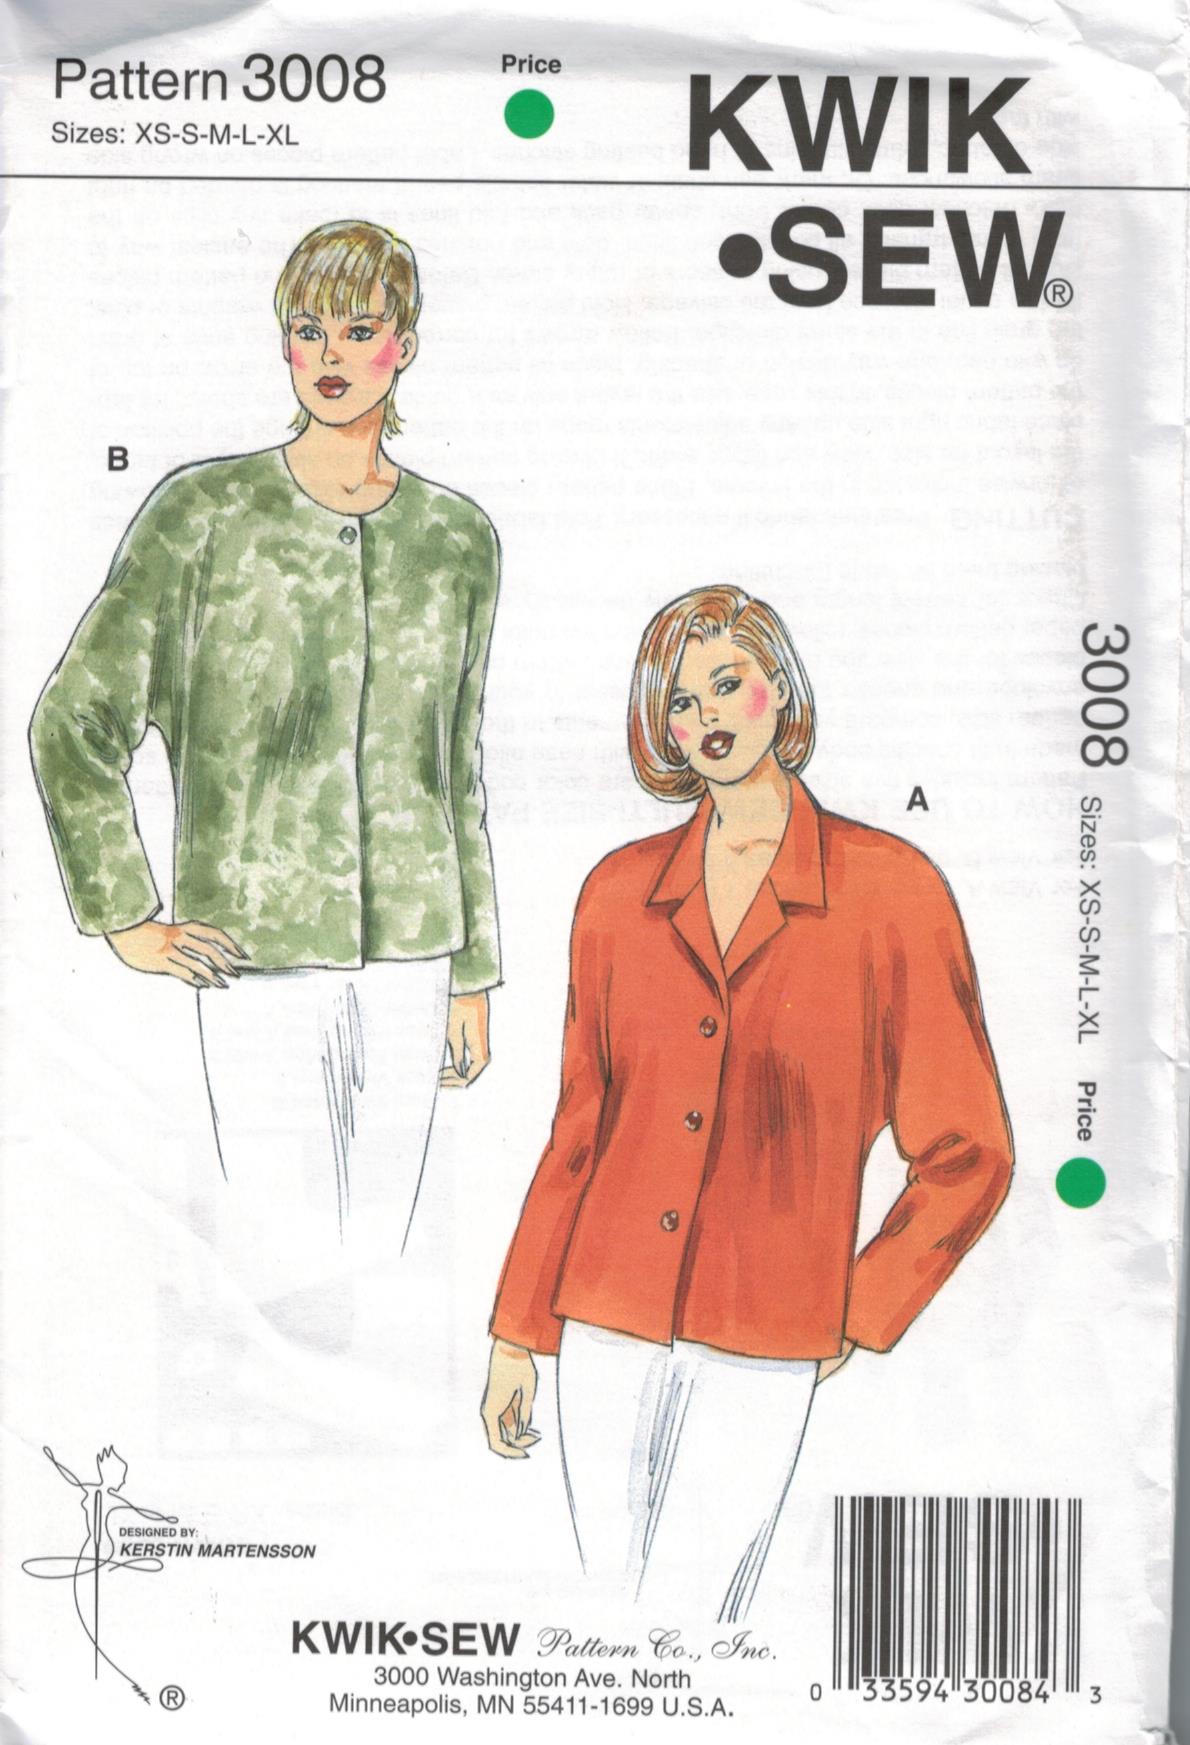 Kwik Sew Pattern 3008 Misses Button front Jackets in two views for Knit and  Woven fabrics Misses sizes Extra Small through Extra Large